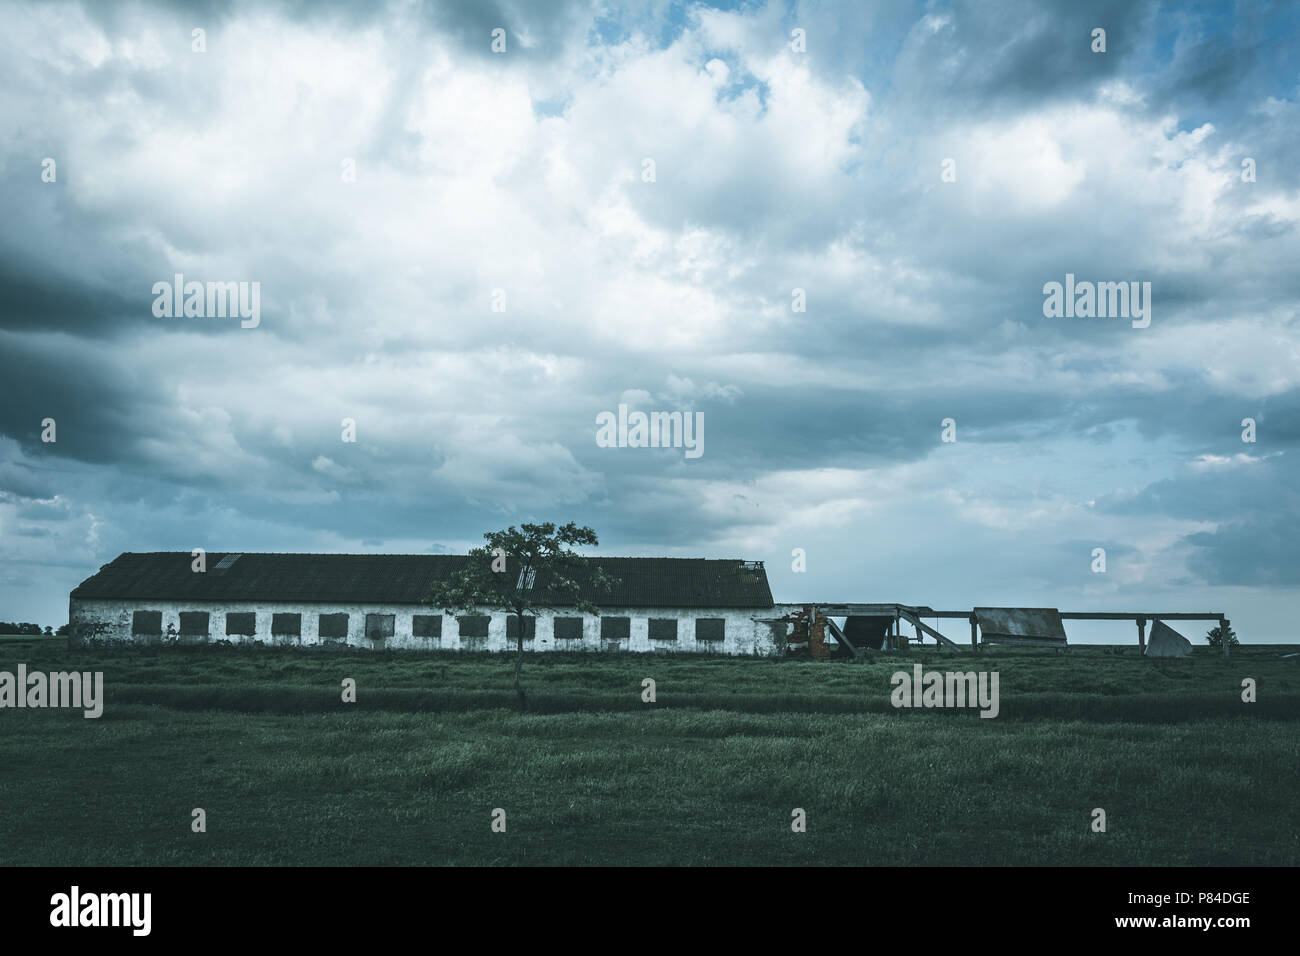 Ruined cowshed in the field, mody effect Stock Photo